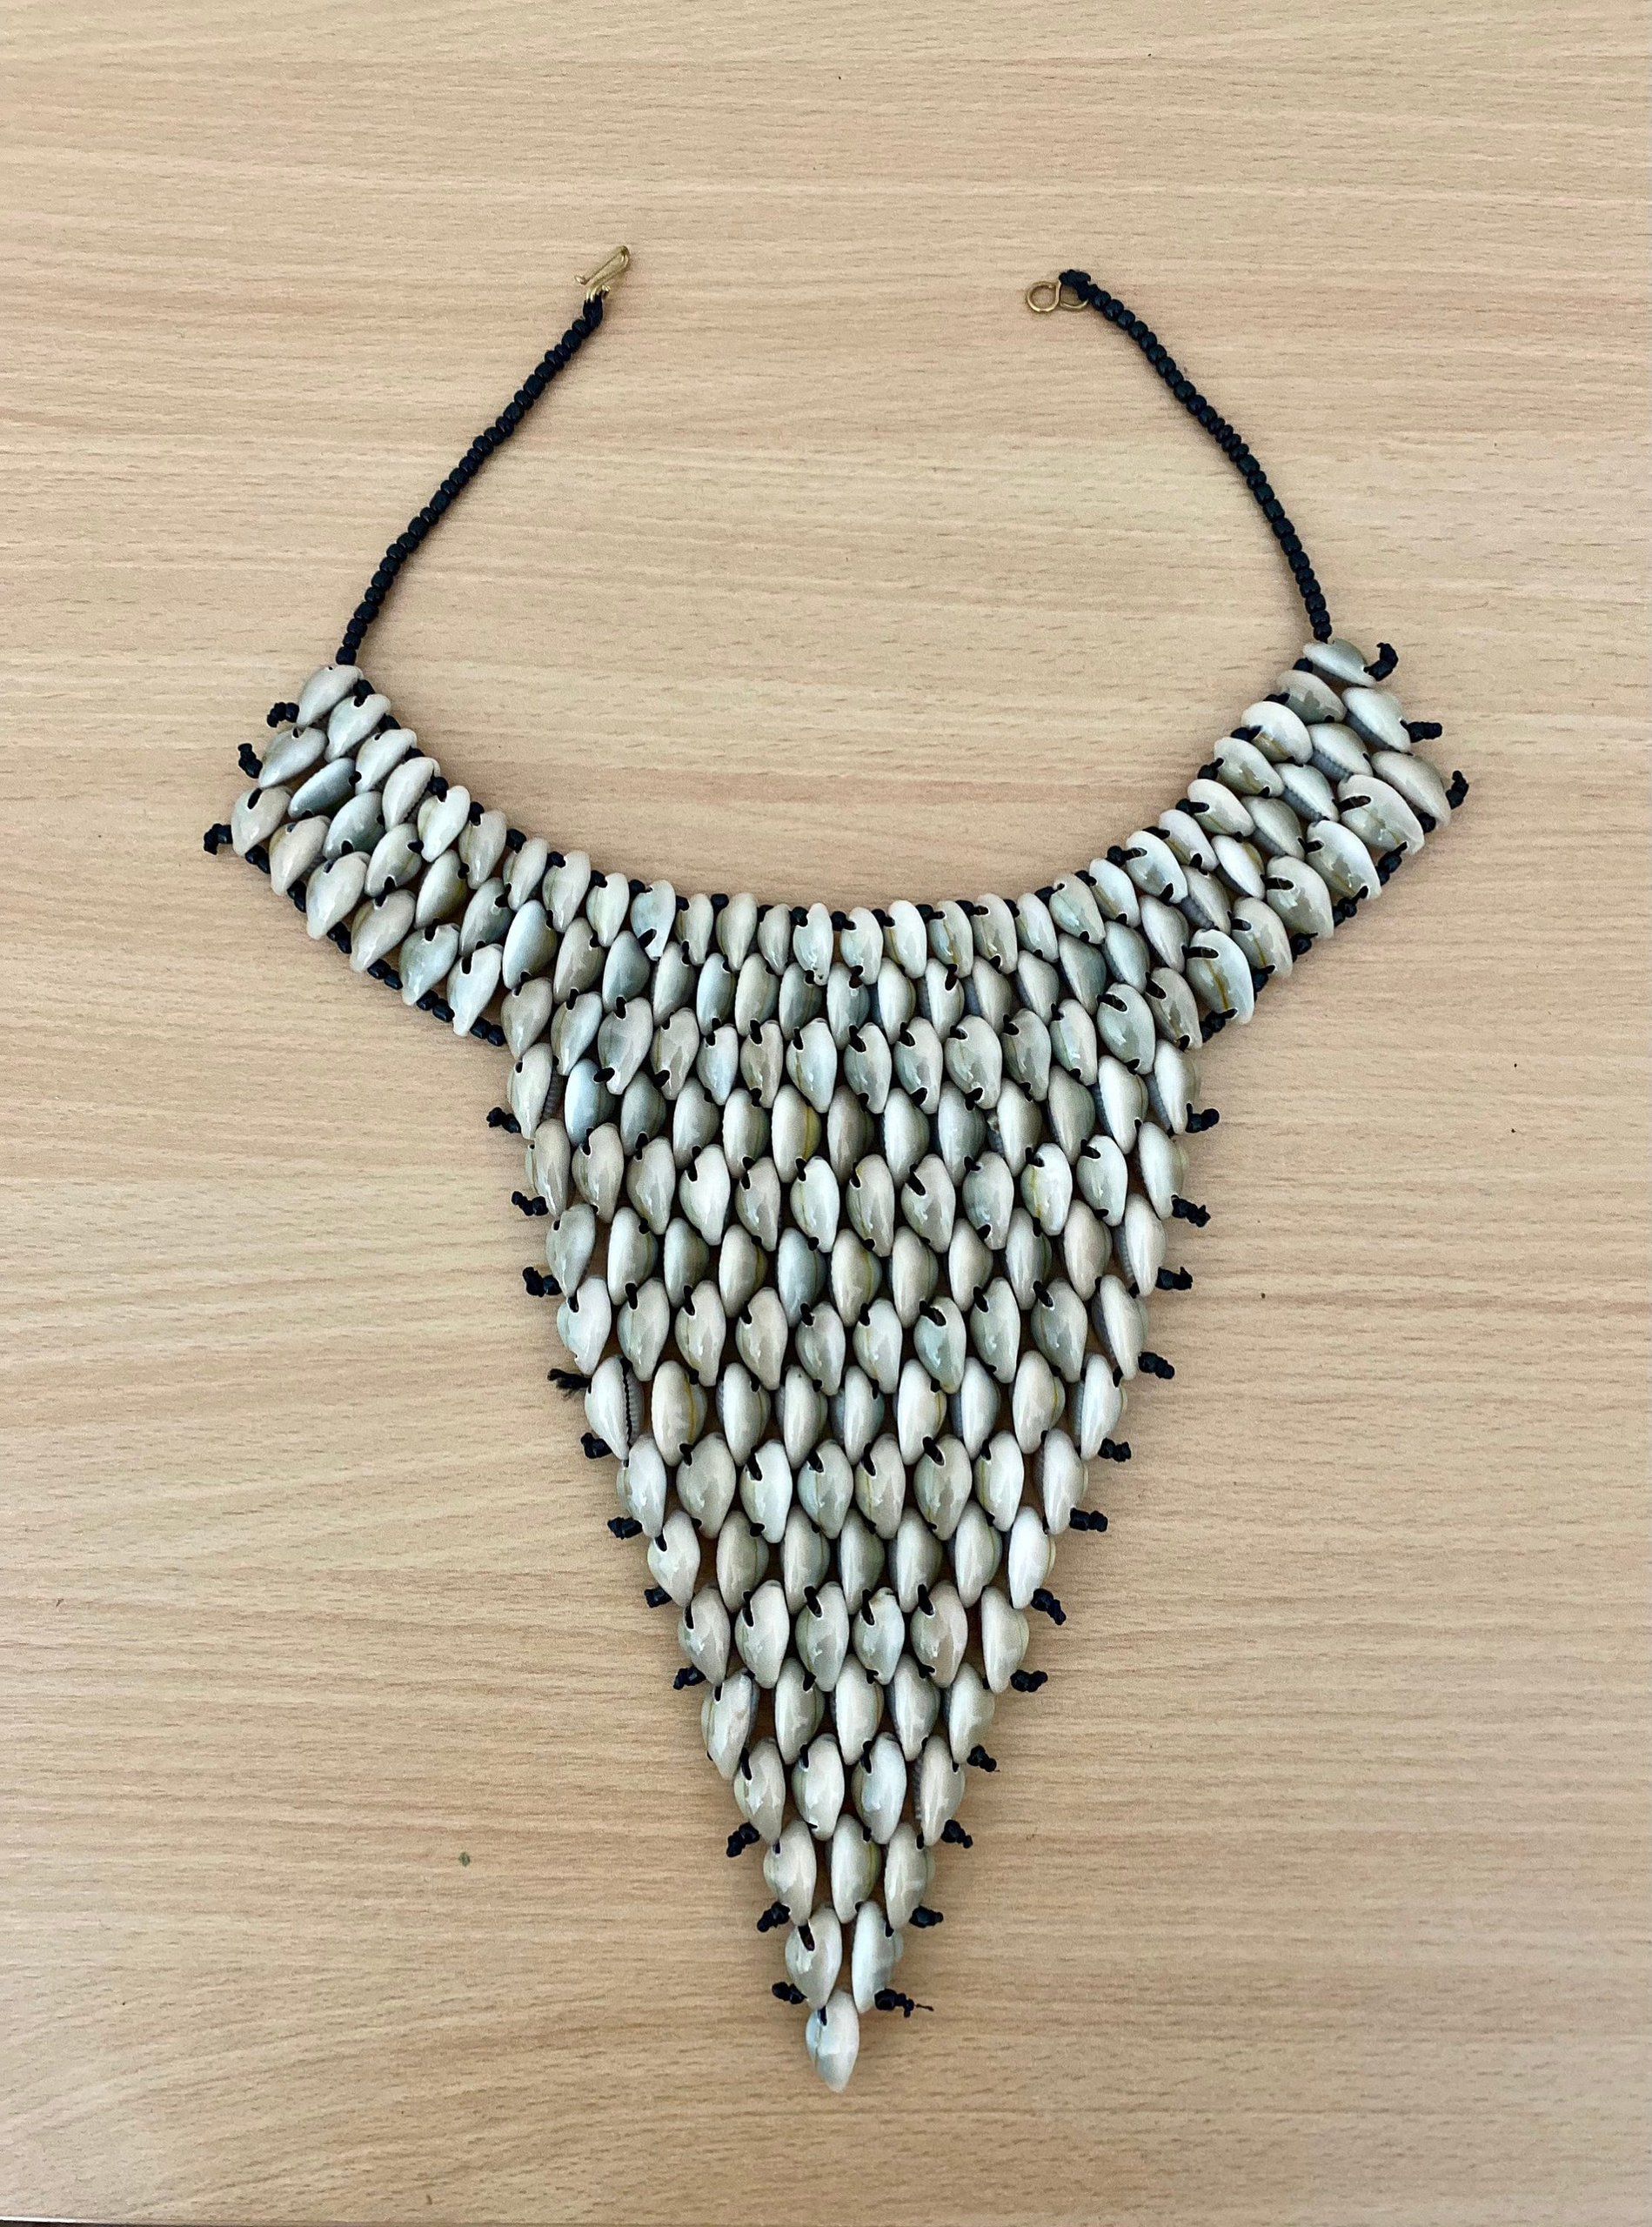 African Maasai Handmade Necklace with Cowrie Shells | Bib Necklace